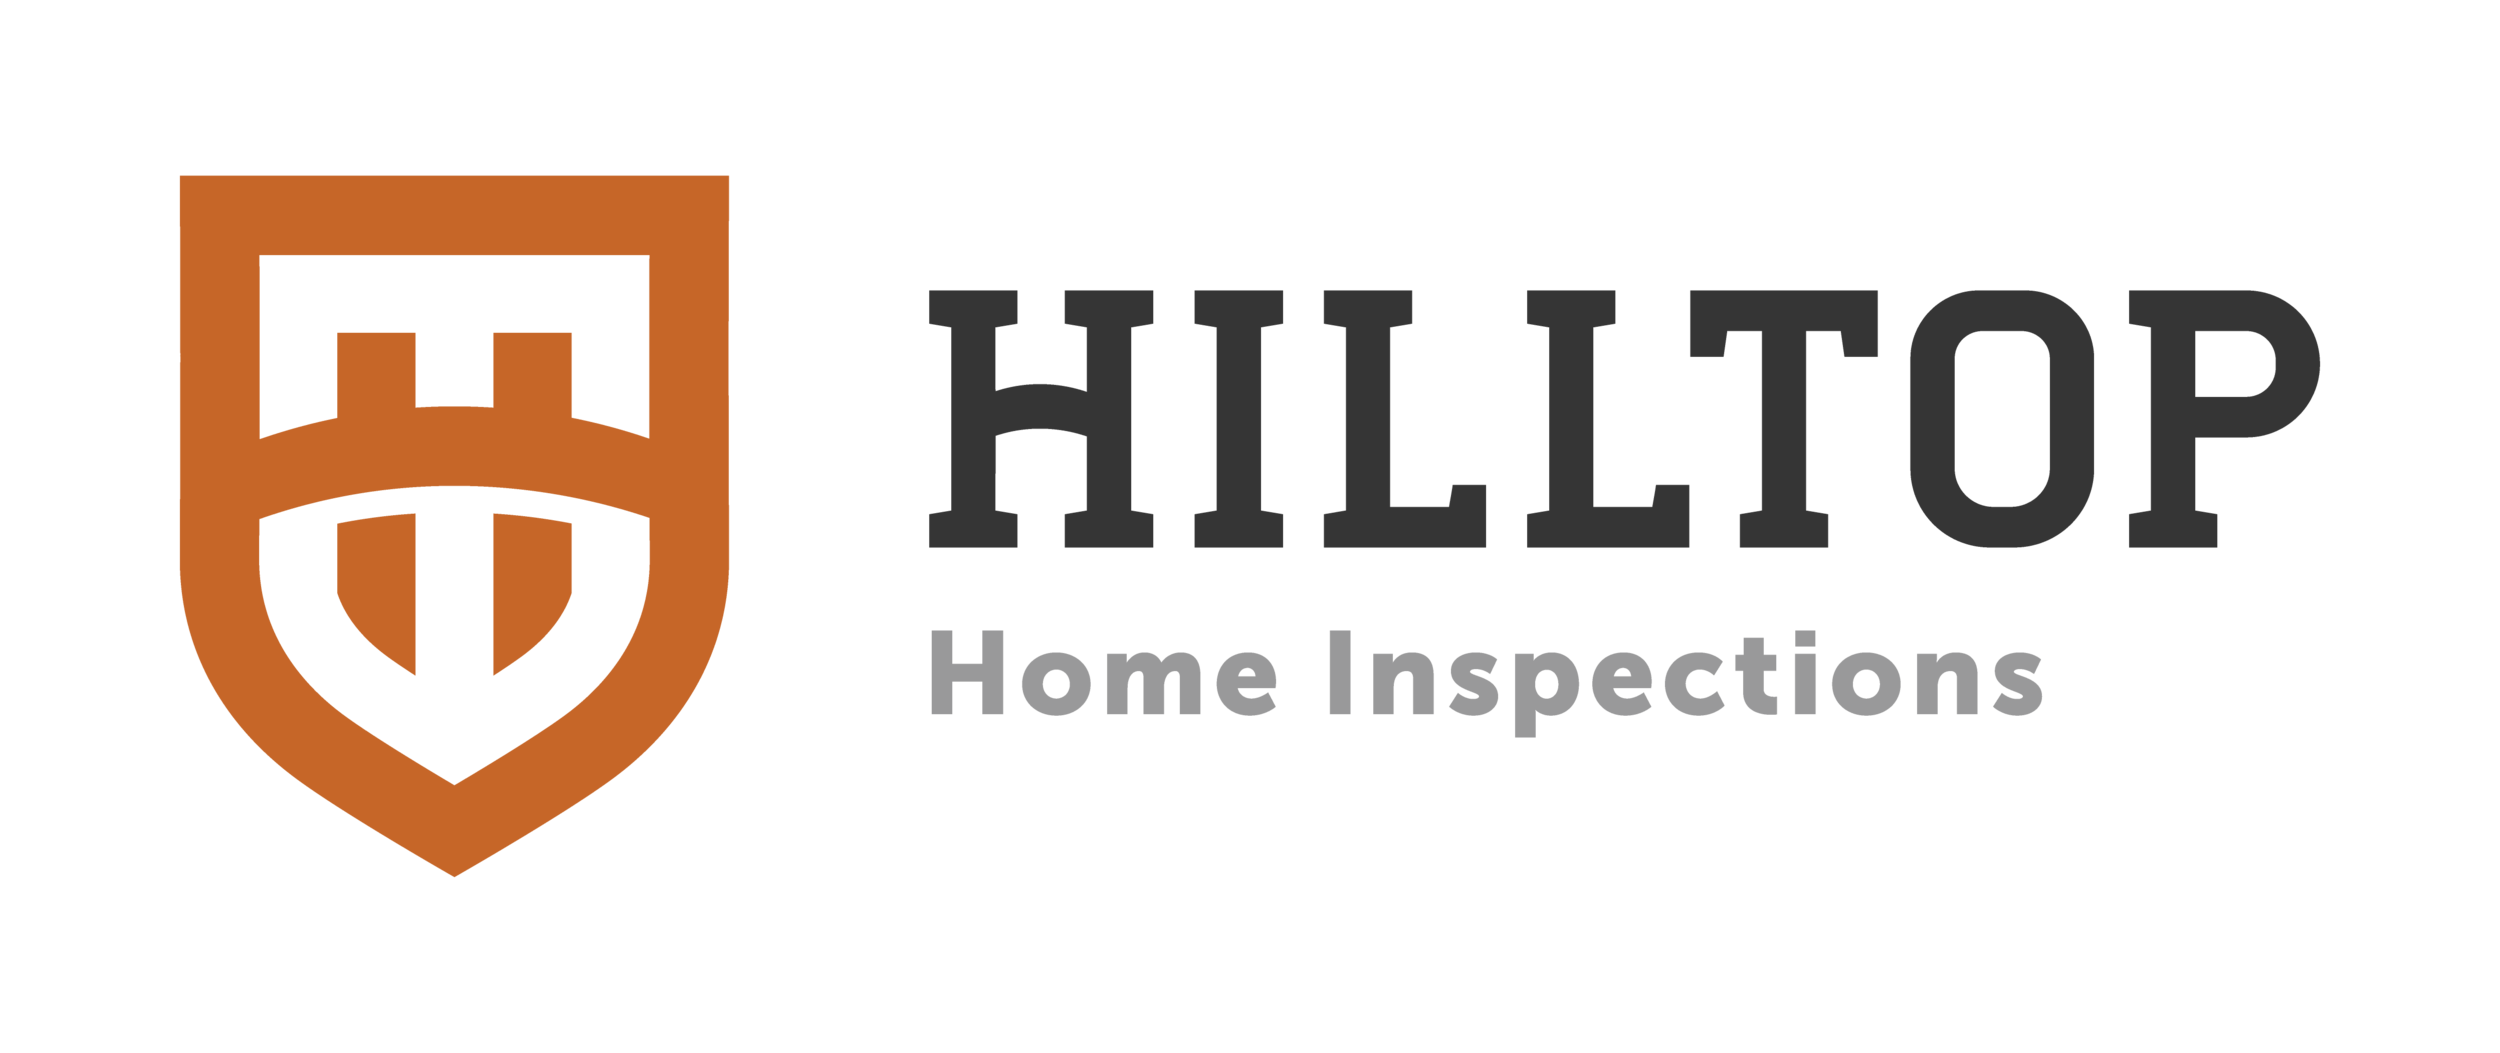 Hilltop Home Inspections